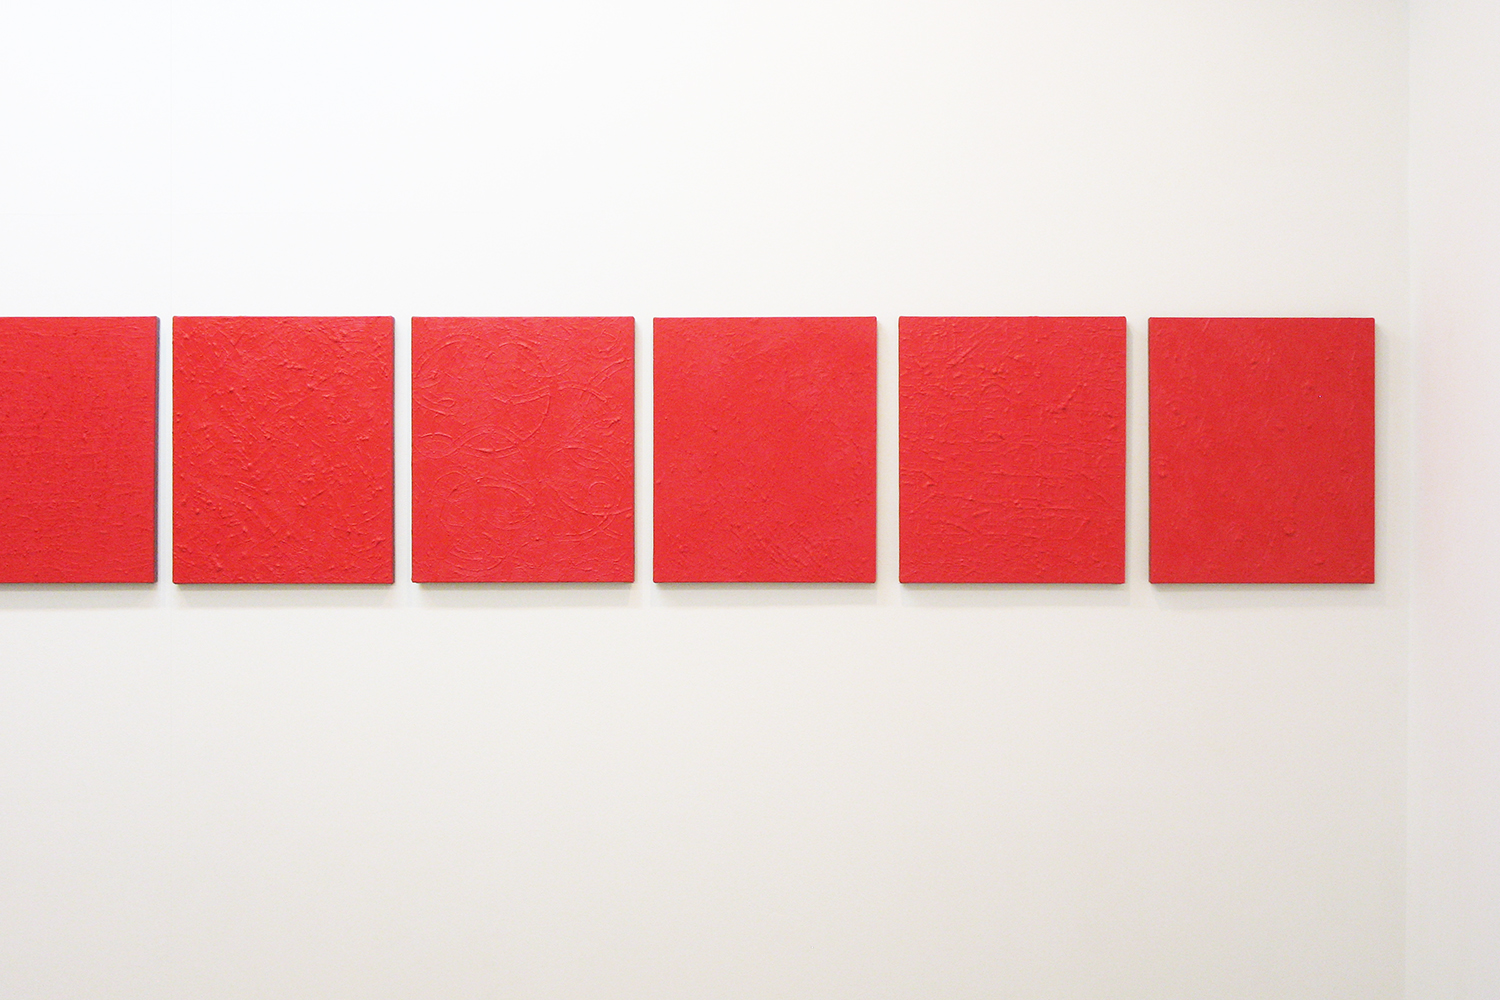 Installation View: Untitled - Beni Red｜Oil on aluminum｜455 x 380 mm｜2012 each